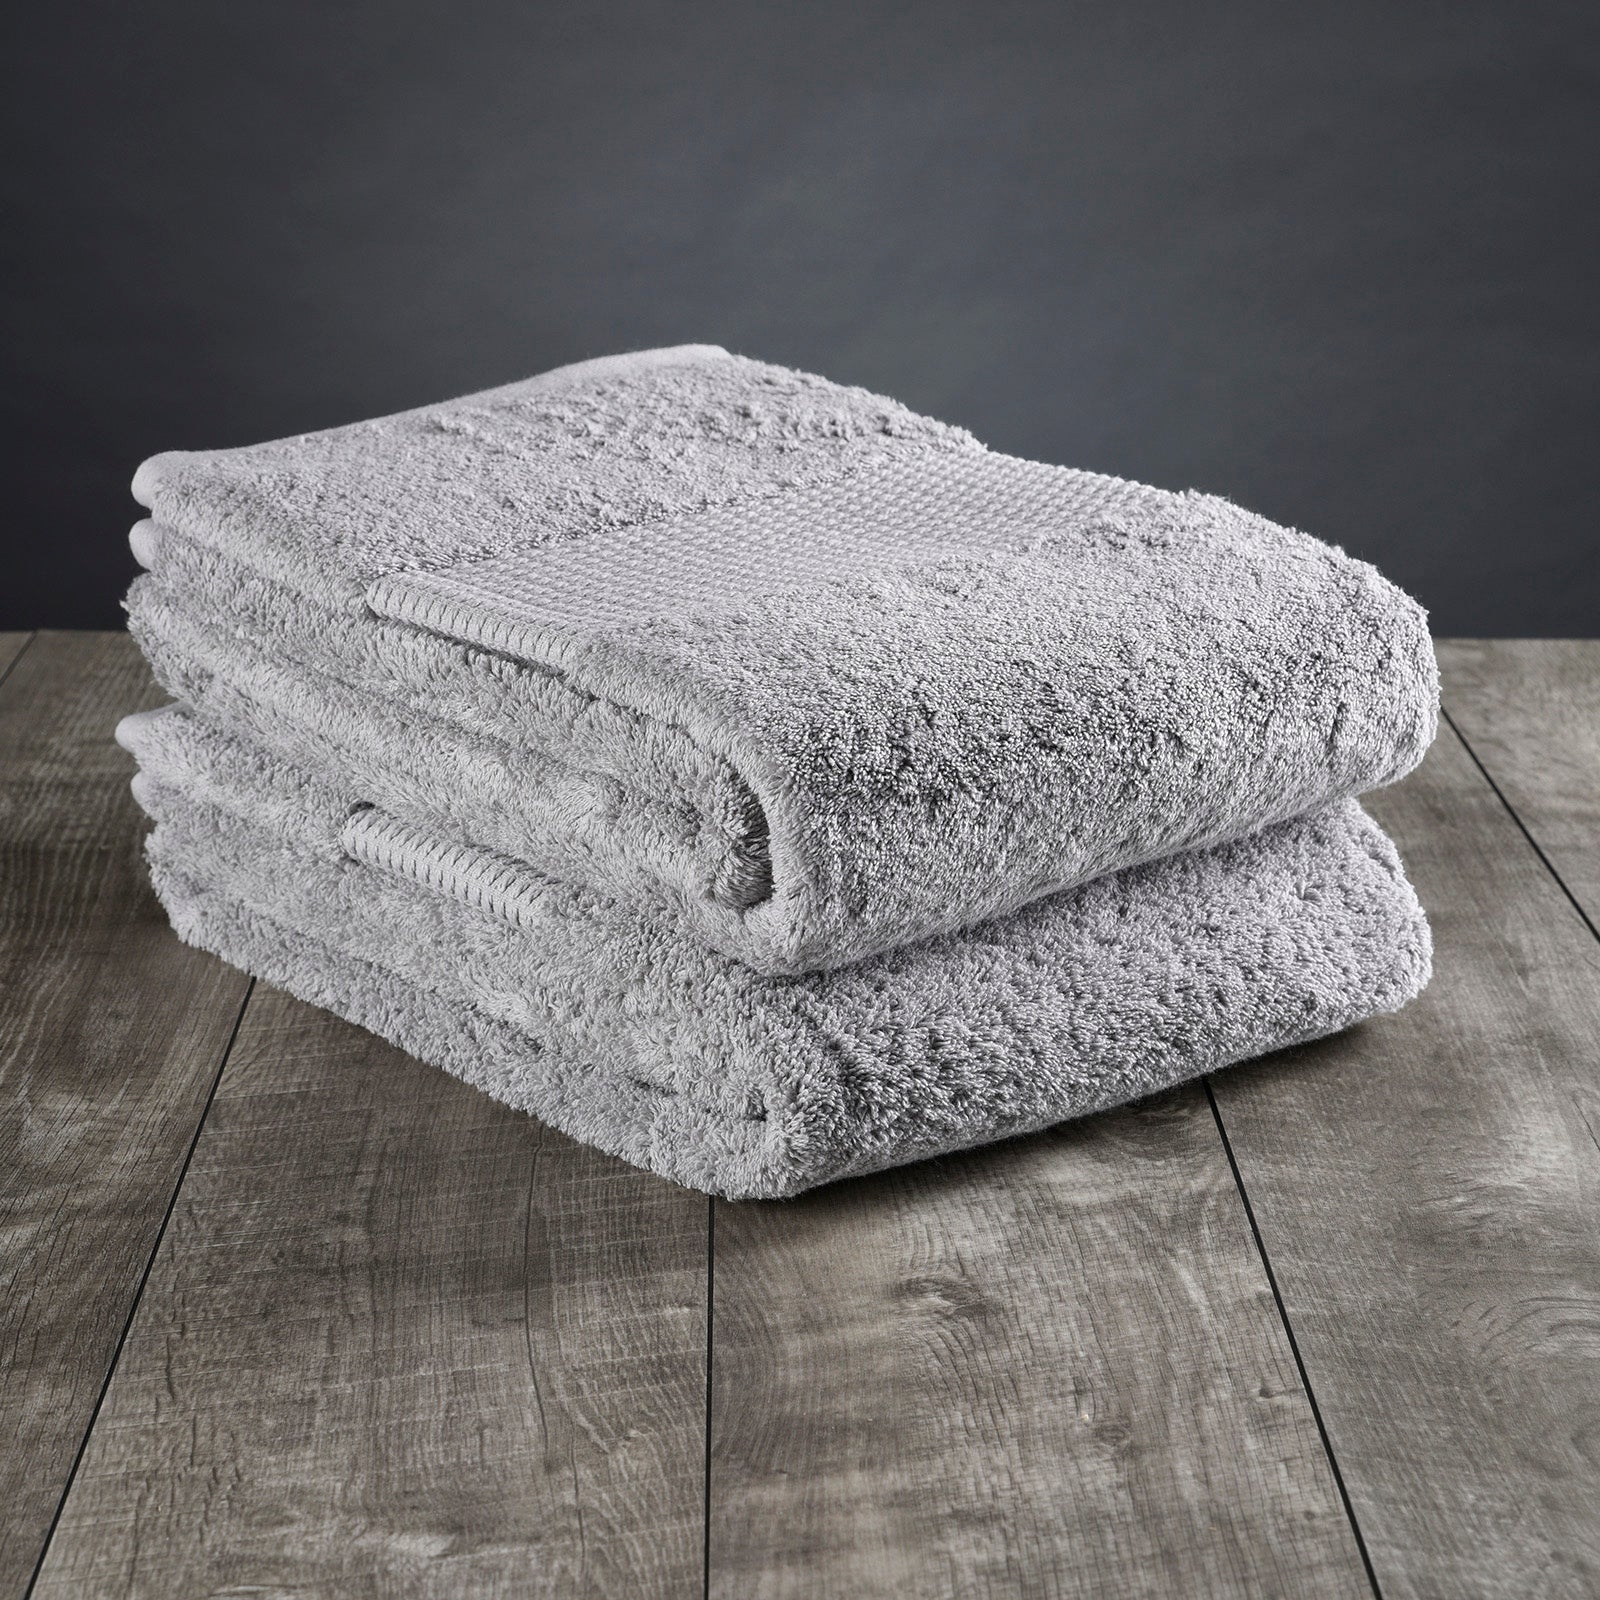 100% Organic Cotton Face Towel Special Offer-One Piece Offer